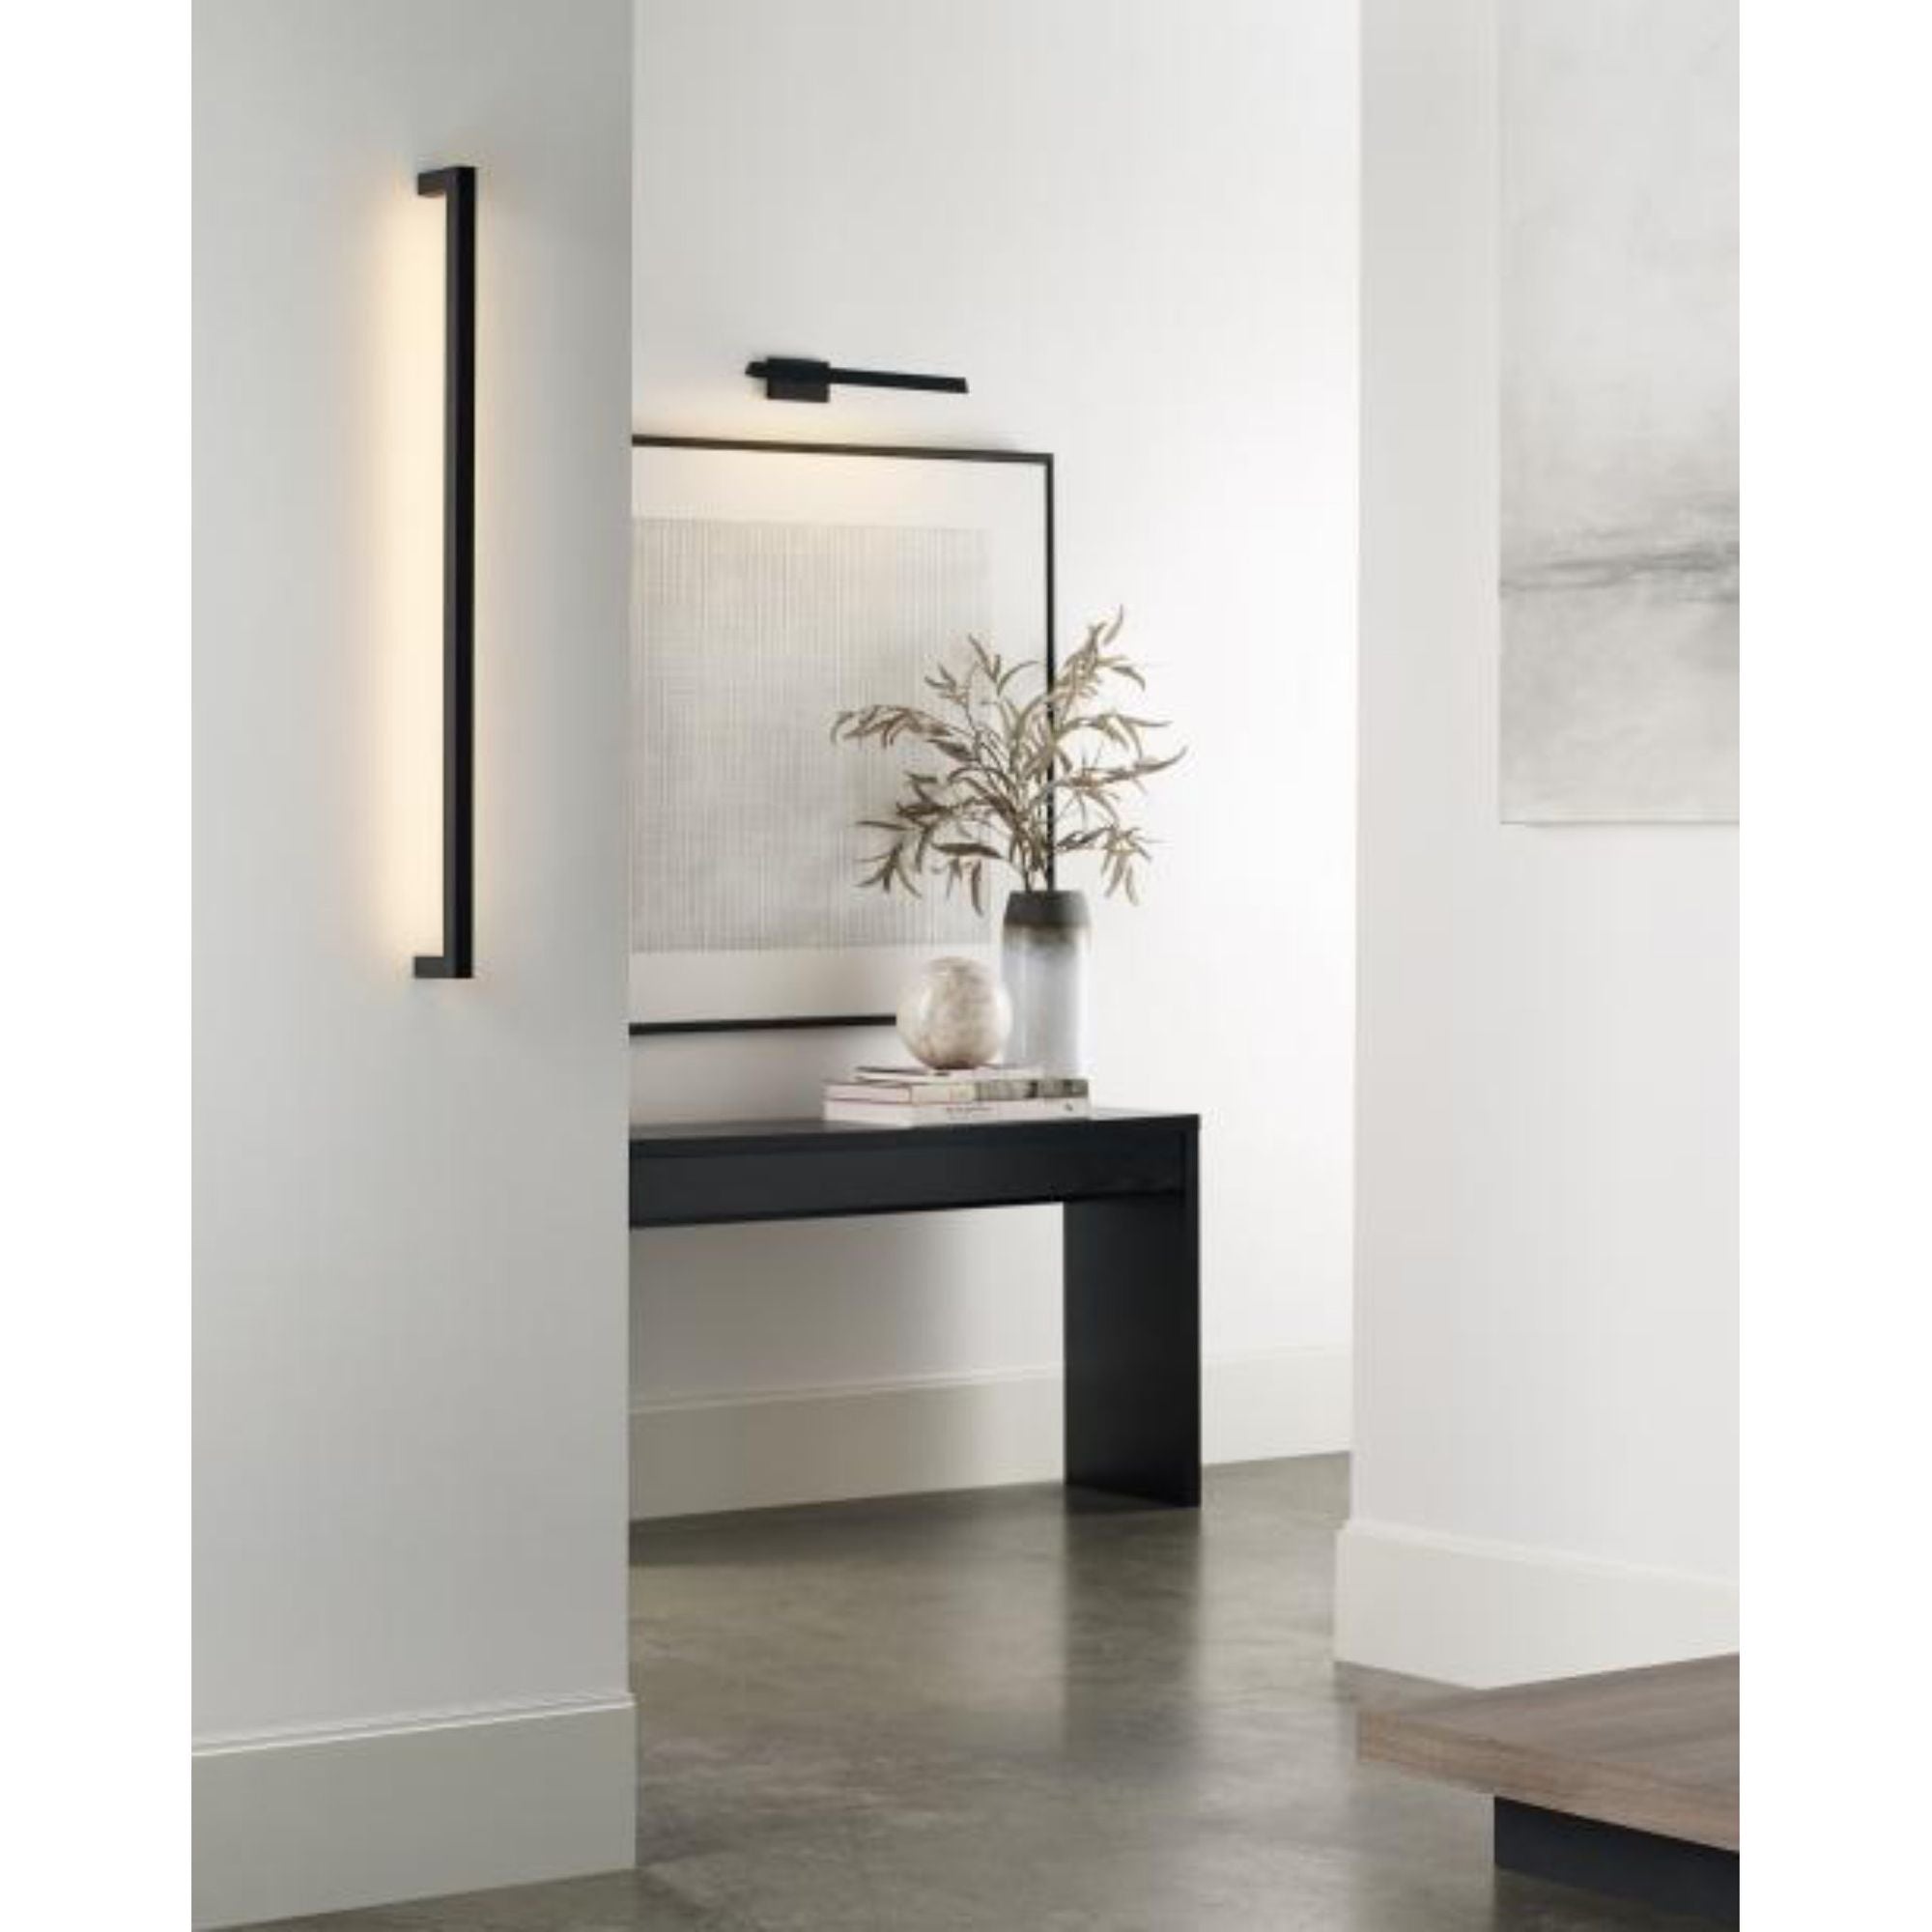 Dessau 24 Picture Light Wall Collection 1-Light LED 3000K Polished Nickel by Sean Lavin